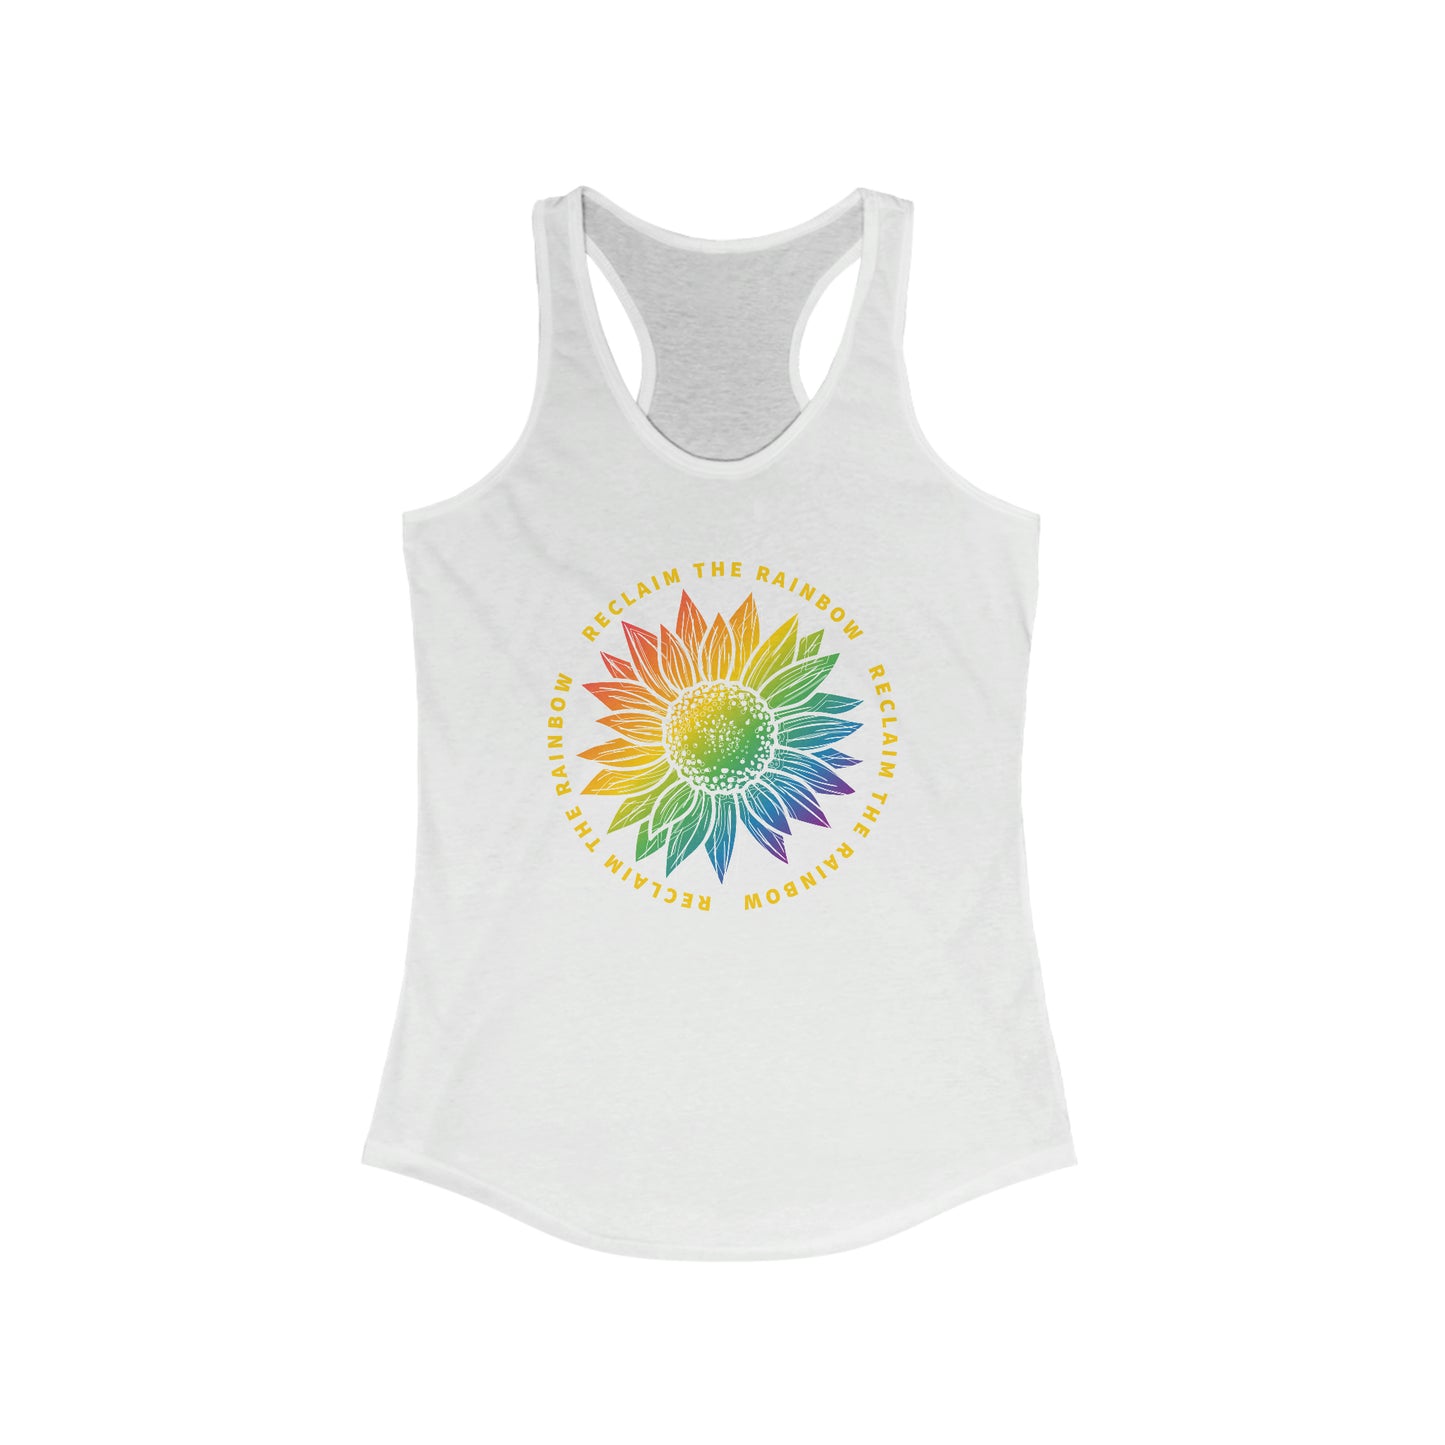 Sunflower Tank Top For Reclaim The Rainbow Tank Top For Take Back The Rainbow Shirt For Spiritual Tank For Genesis 9:17 Tank Top For Christian Shirts